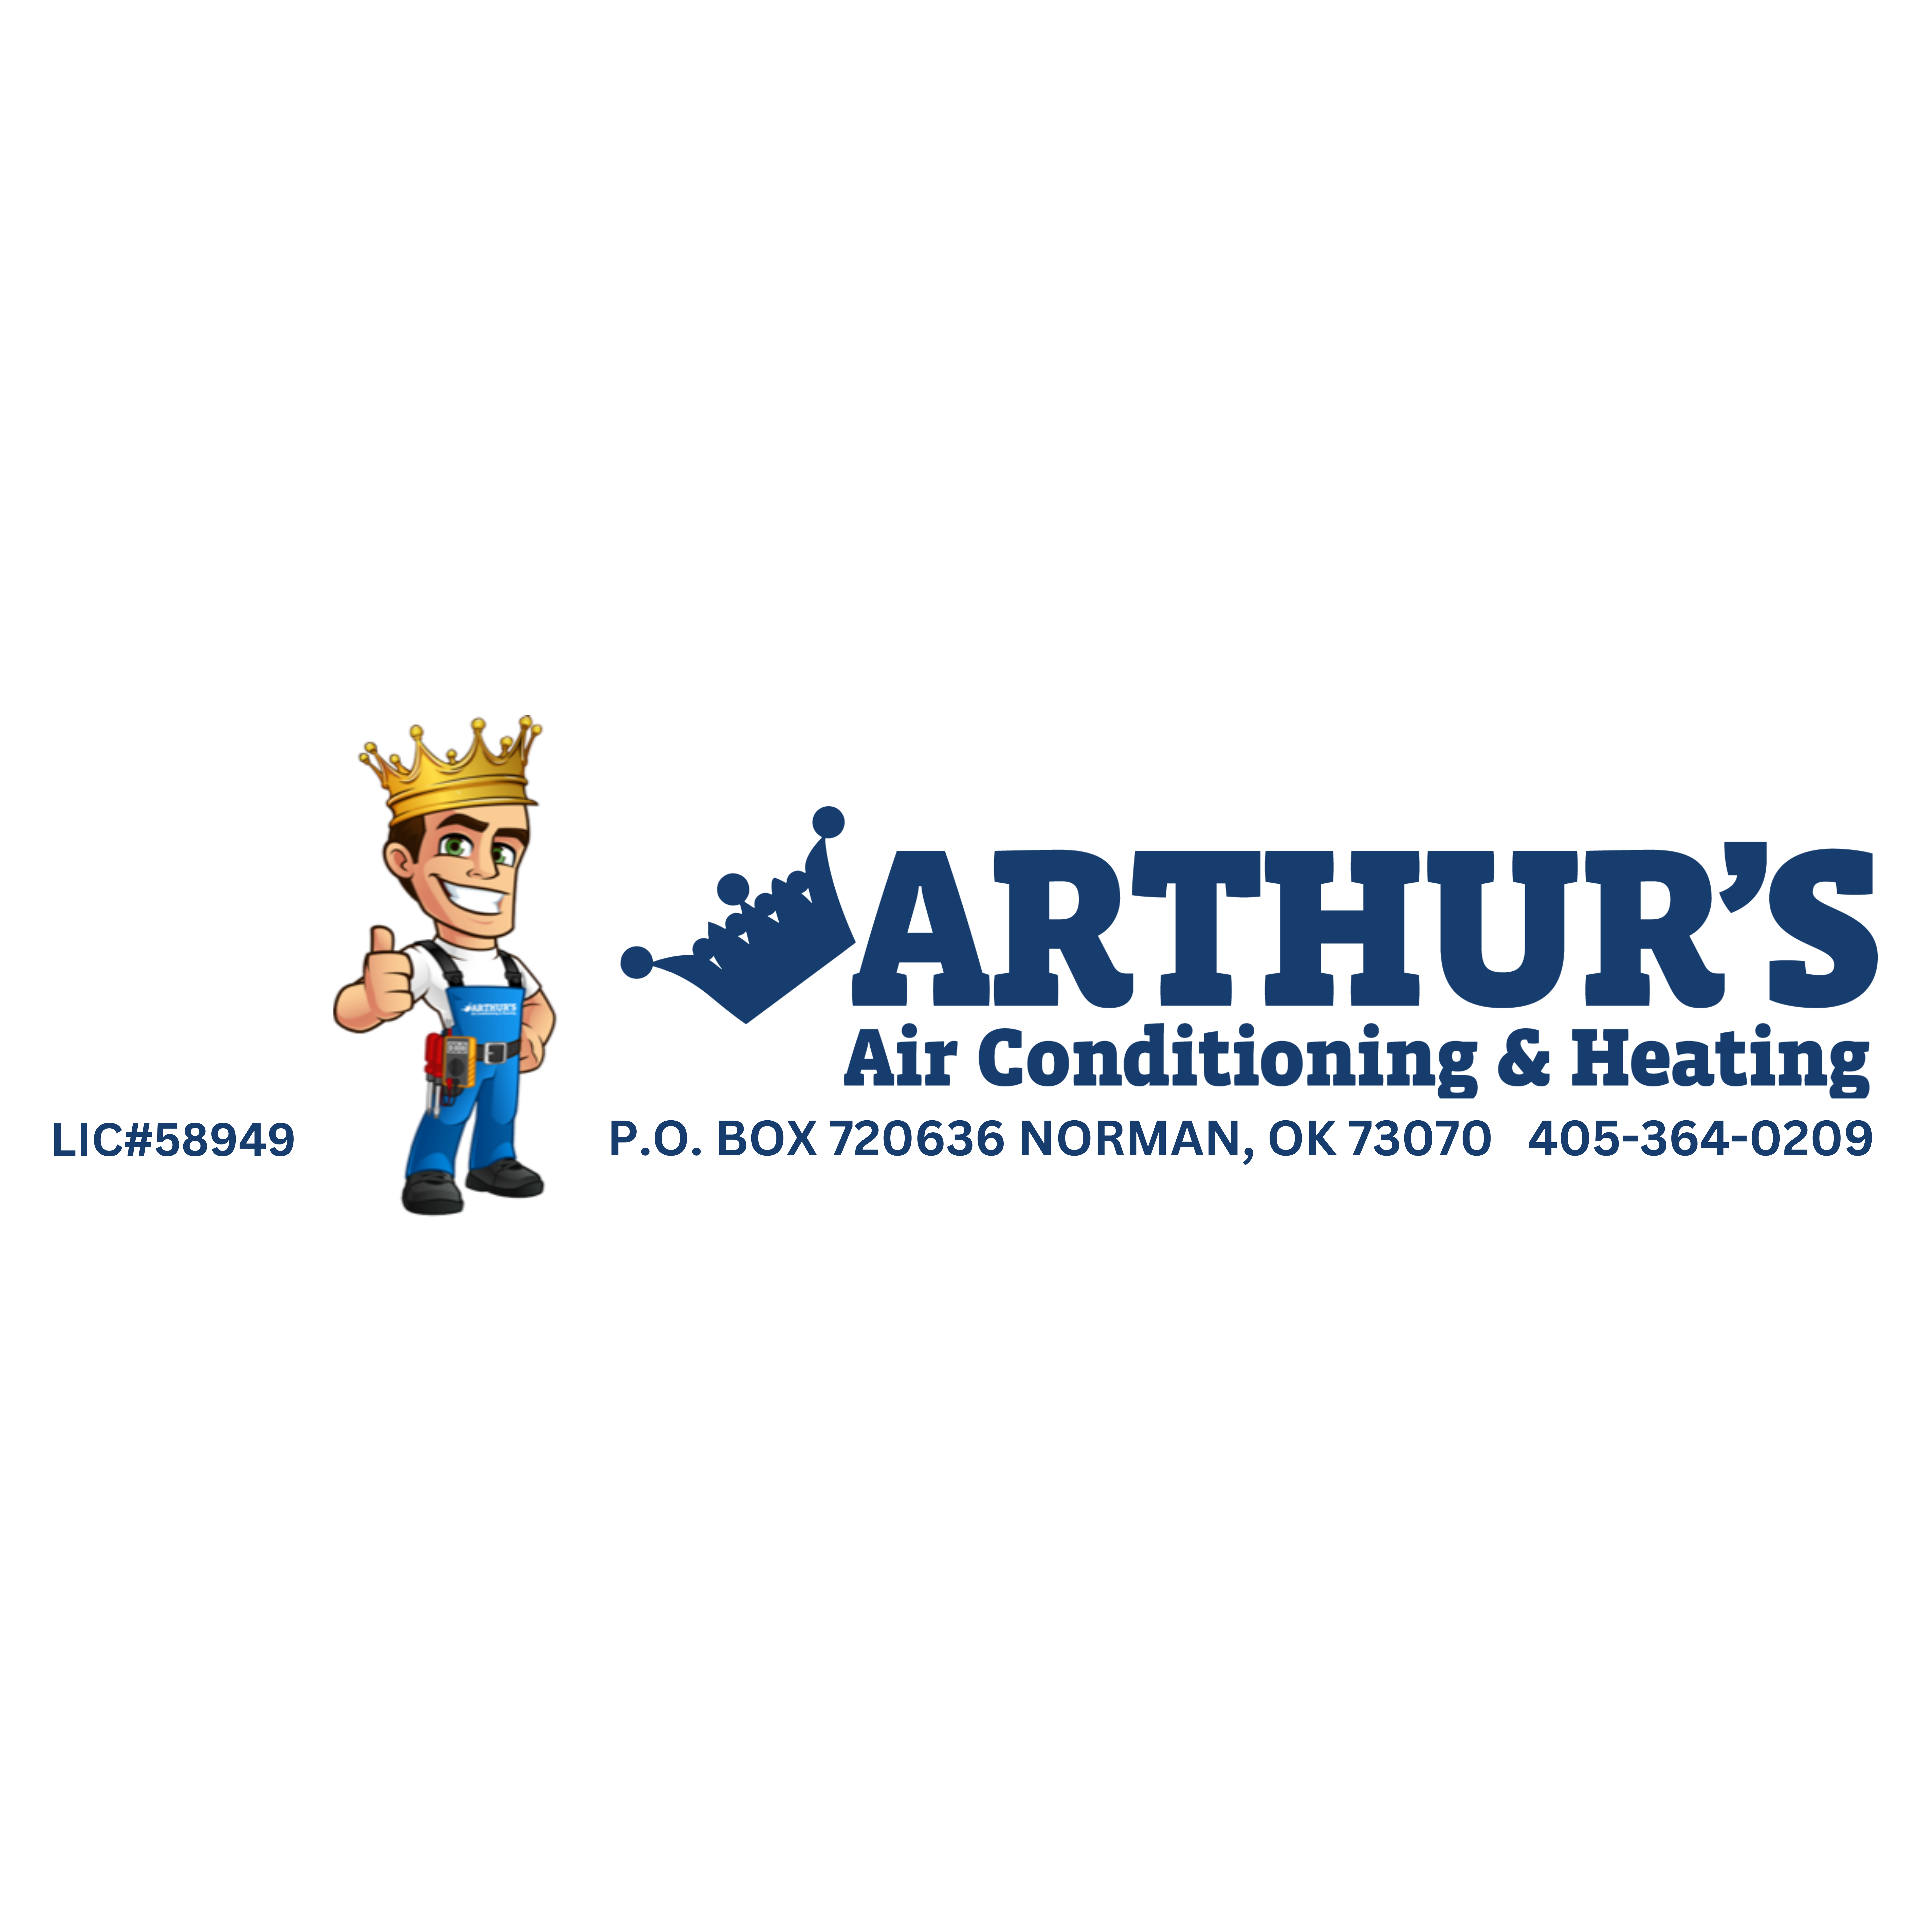 Arthur's Air Conditioning and Heating, LLC